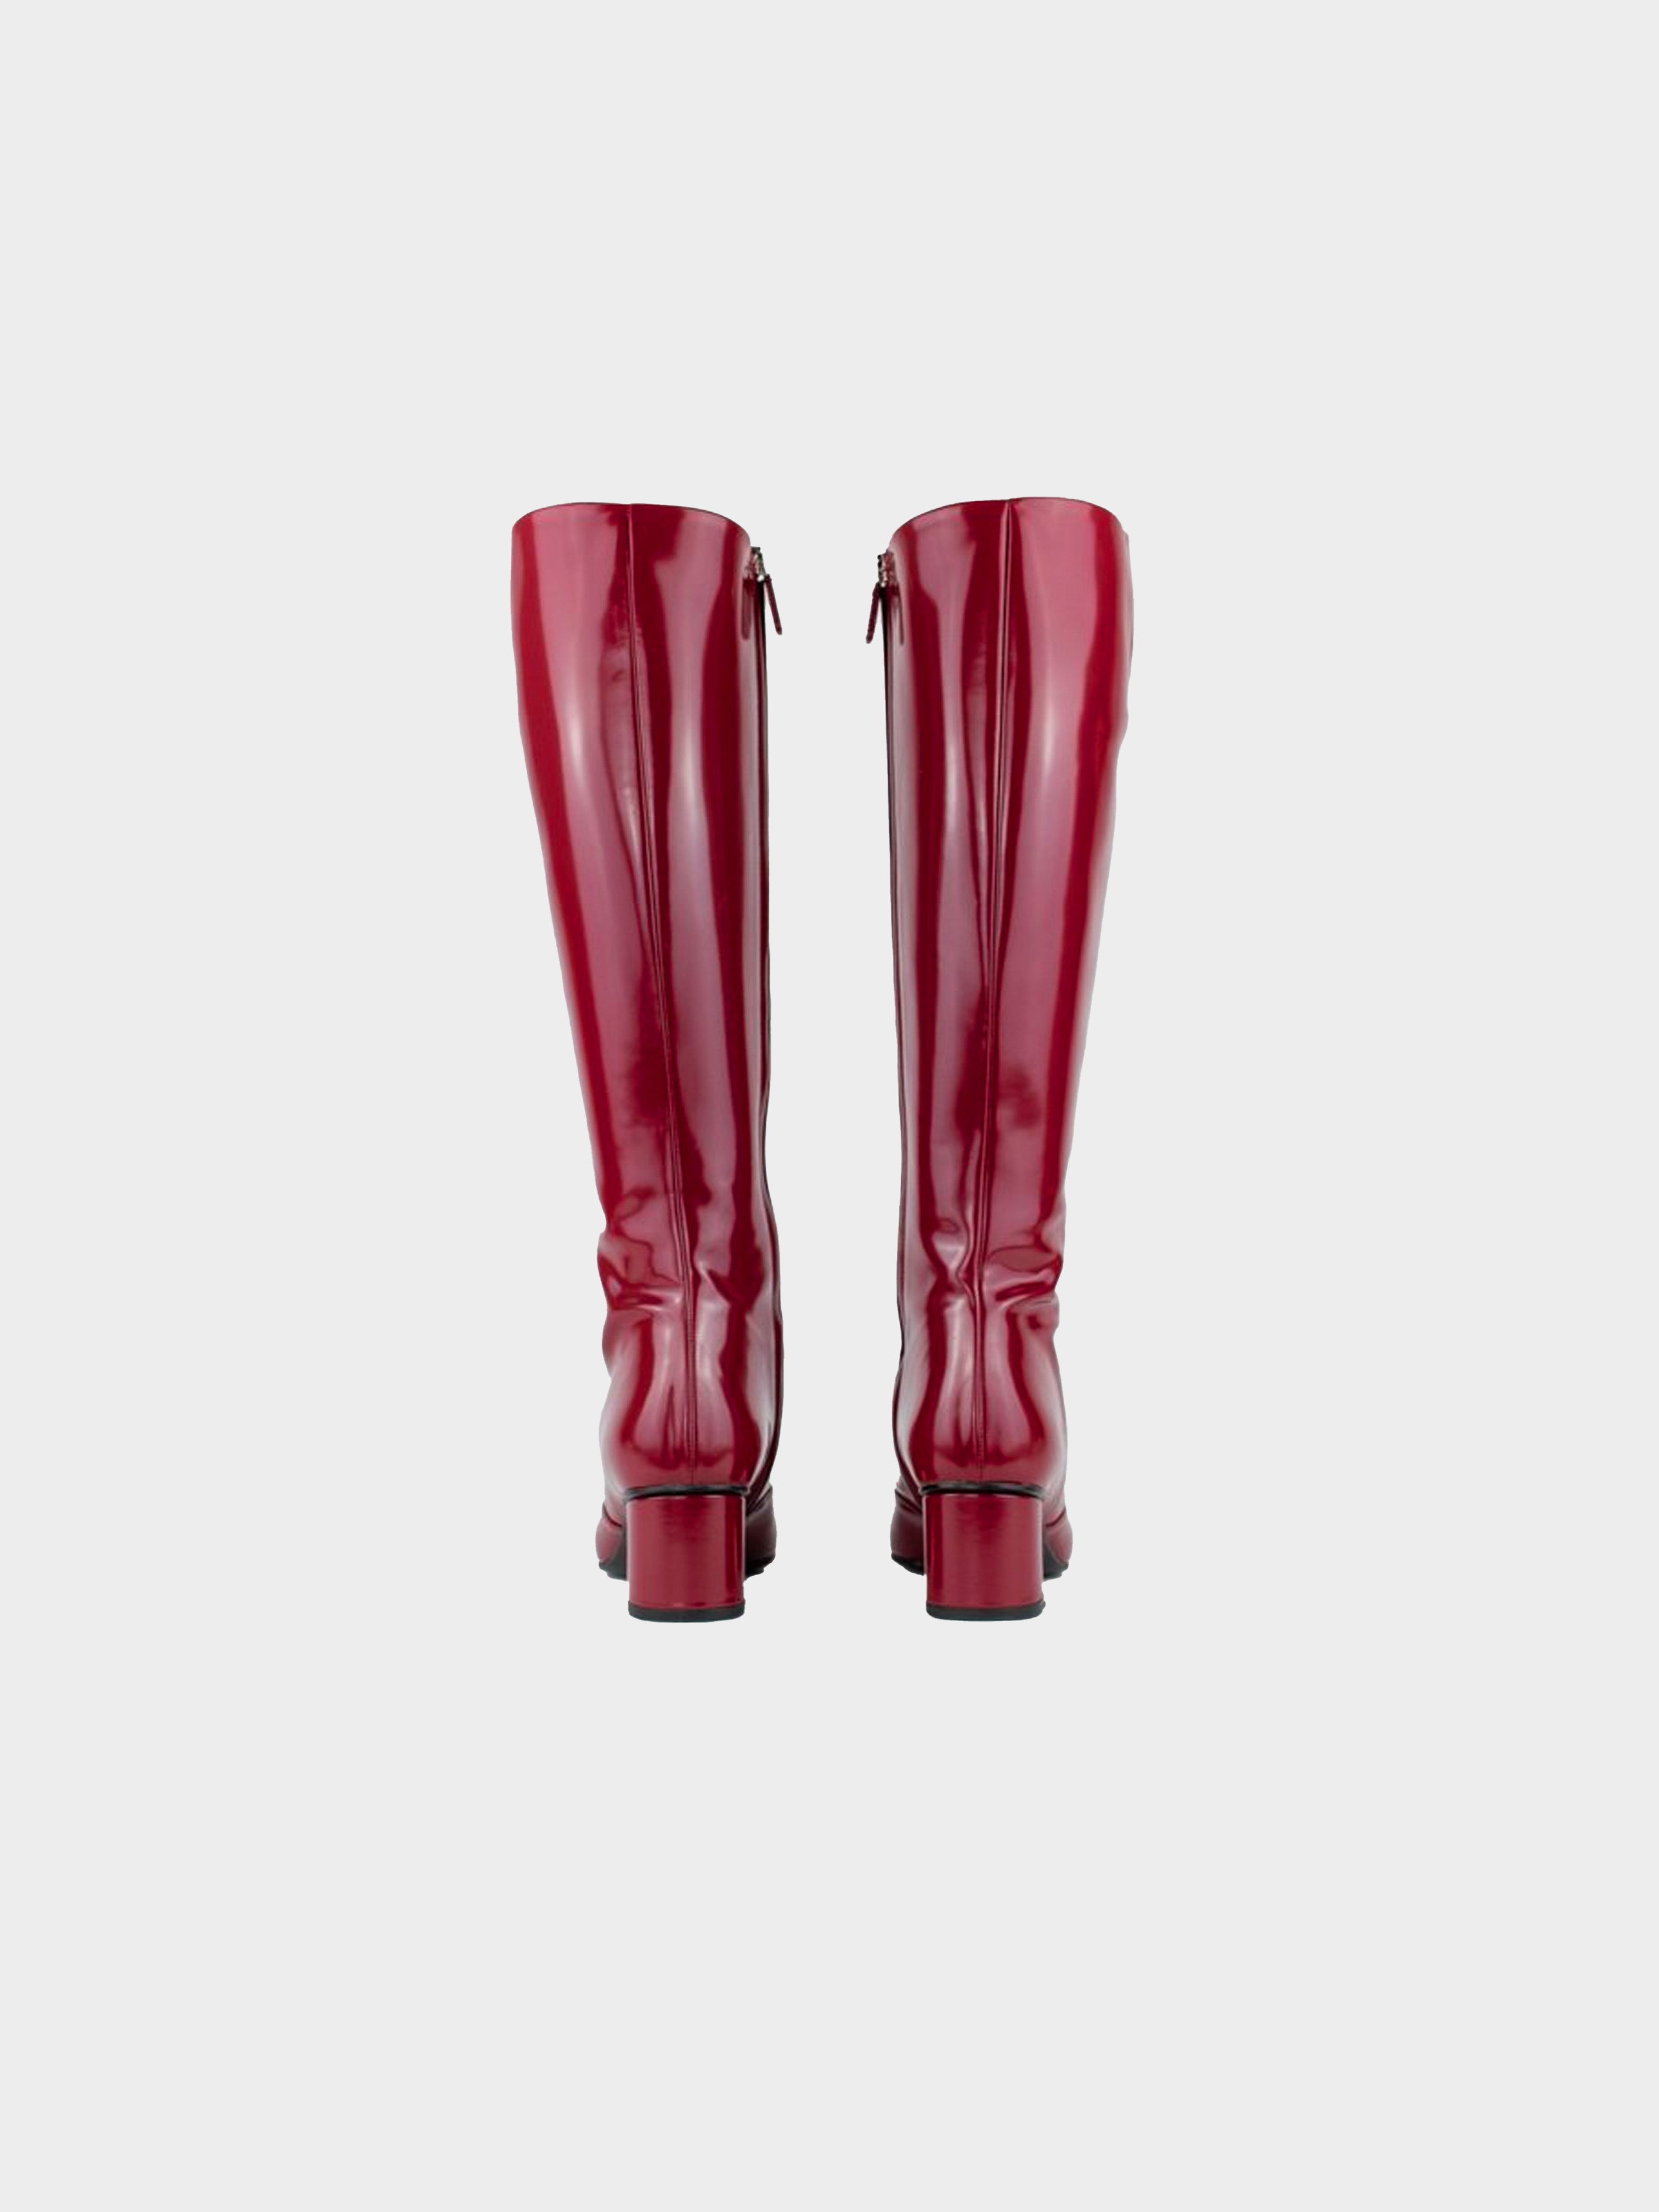 Gucci 2010s Red Patent Leather Horsebit Riding Boots